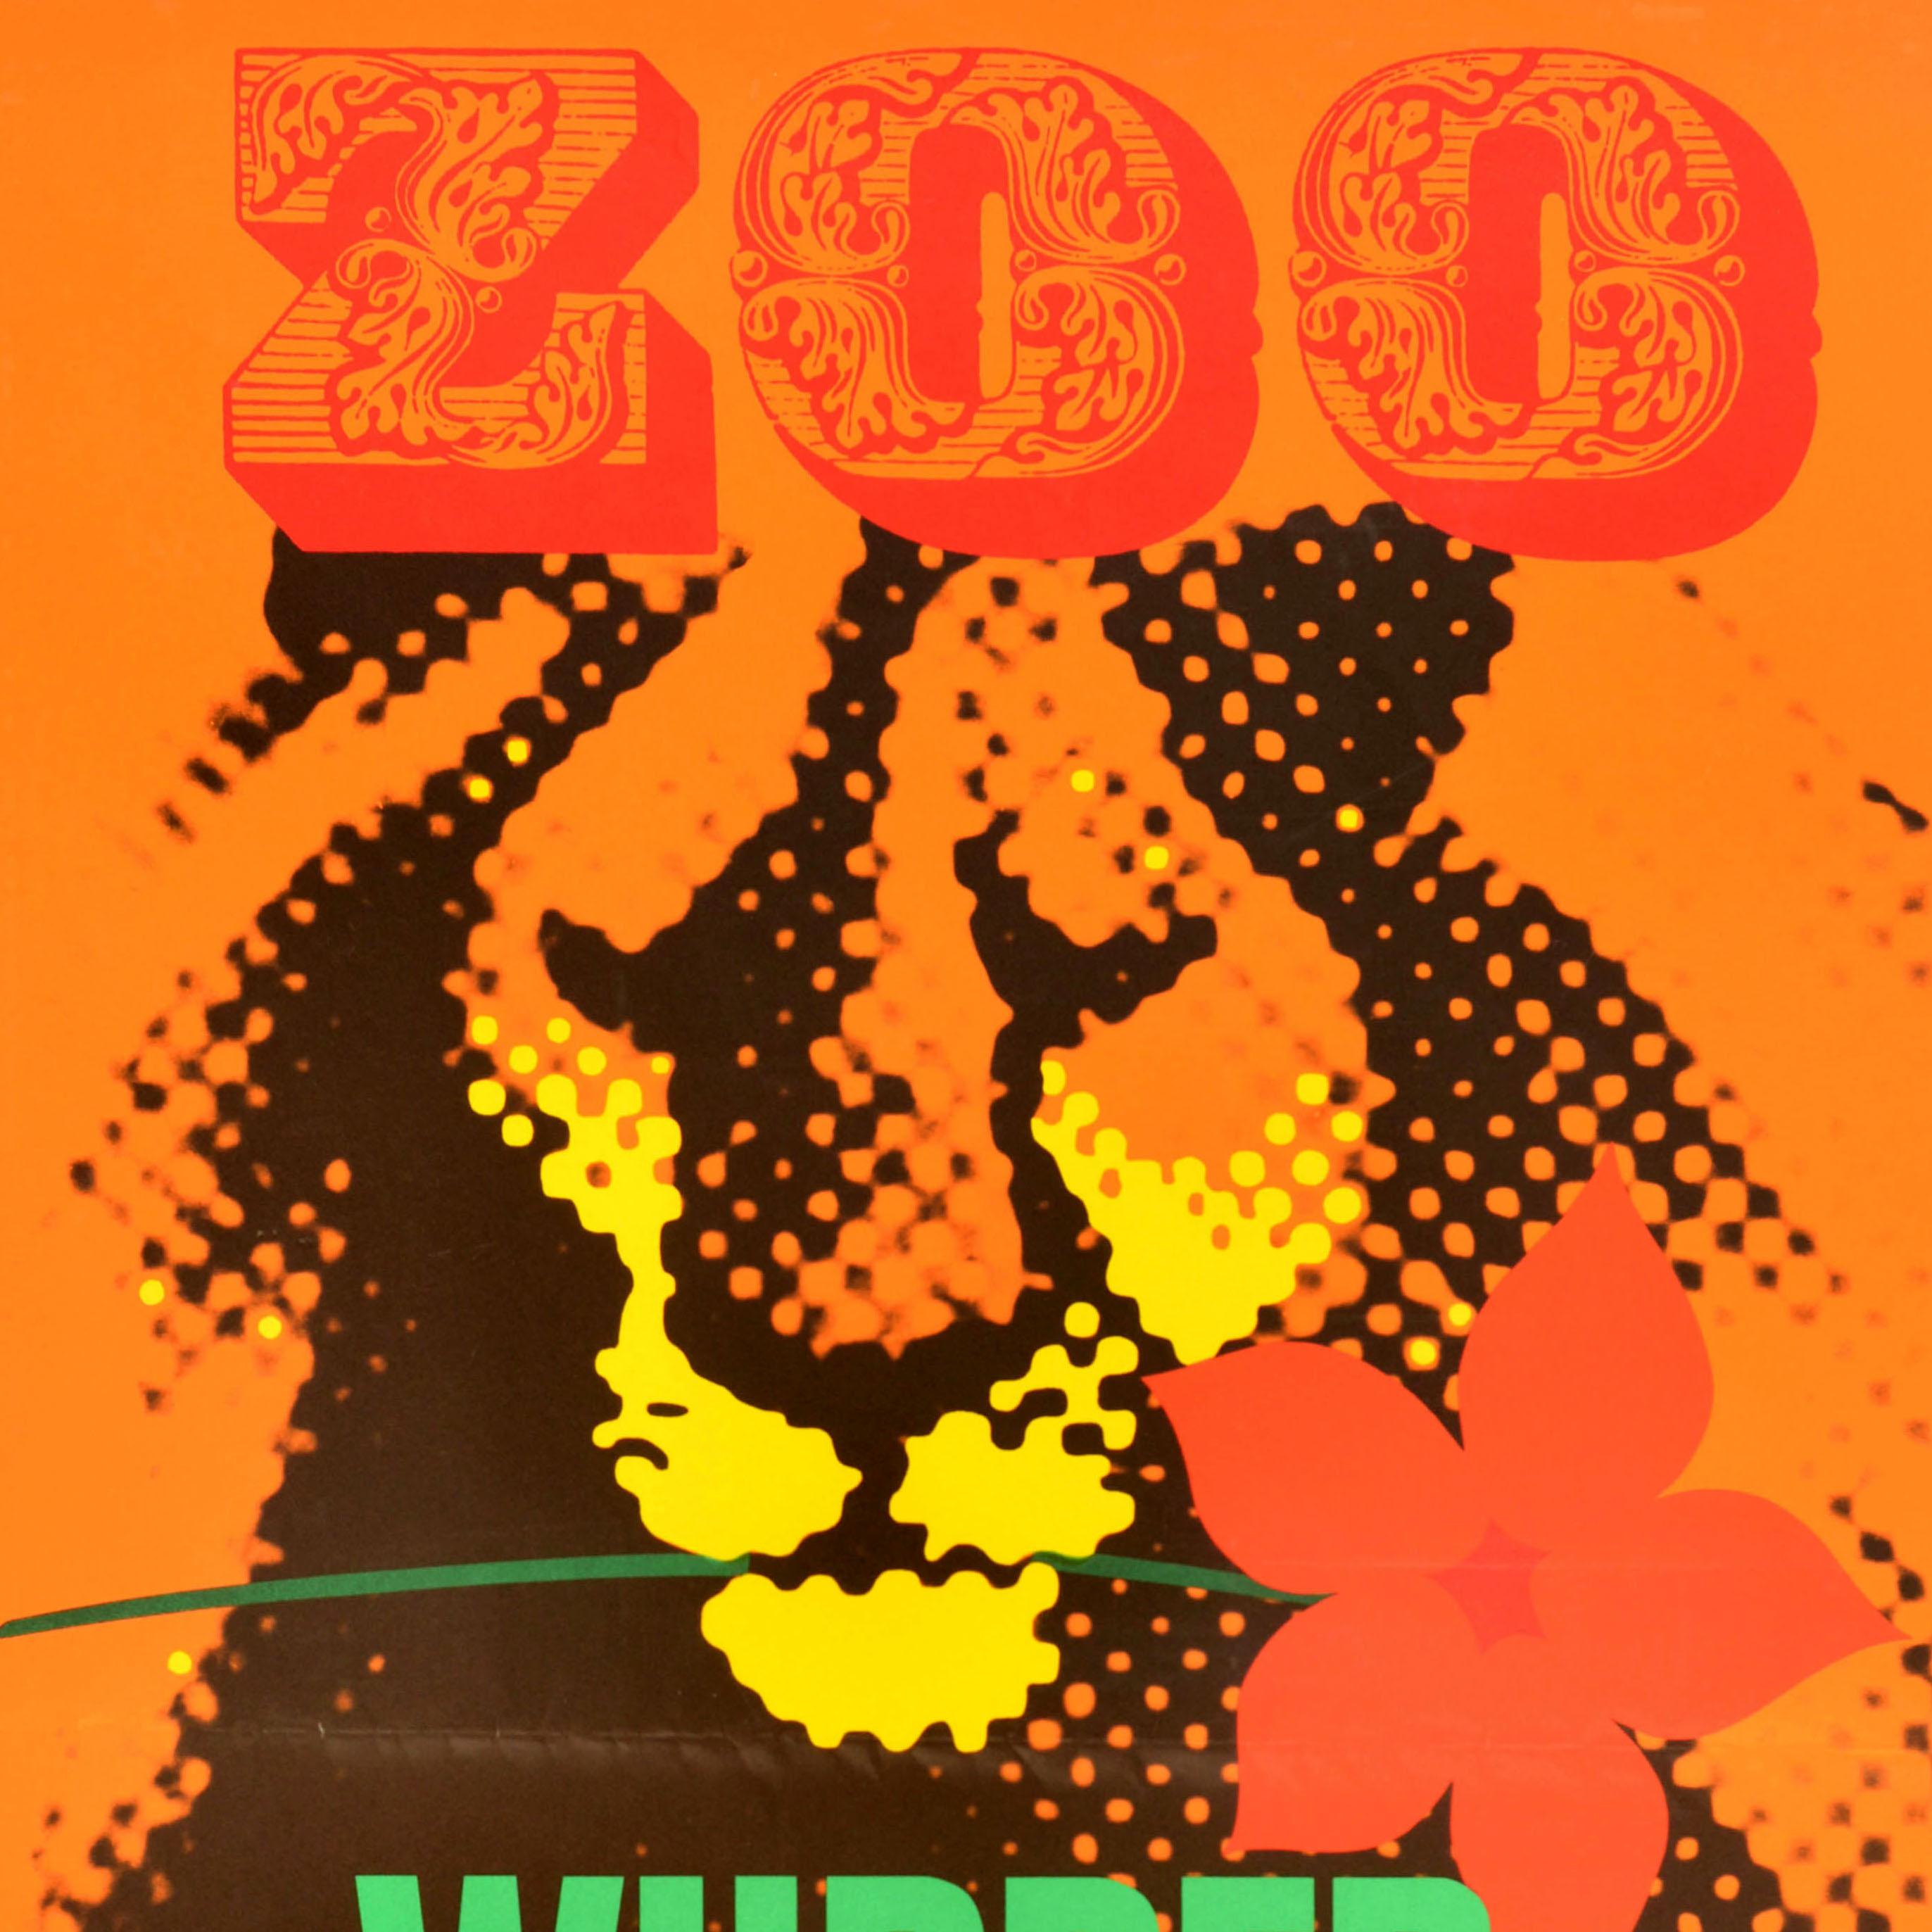 Original vintage advertising poster for Wuppertal Zoo featuring a colourful design depicting a lion holding a flower in its mouth against an orange background with the title text in decorative bold lettering above and below. Founded in 1879 as the